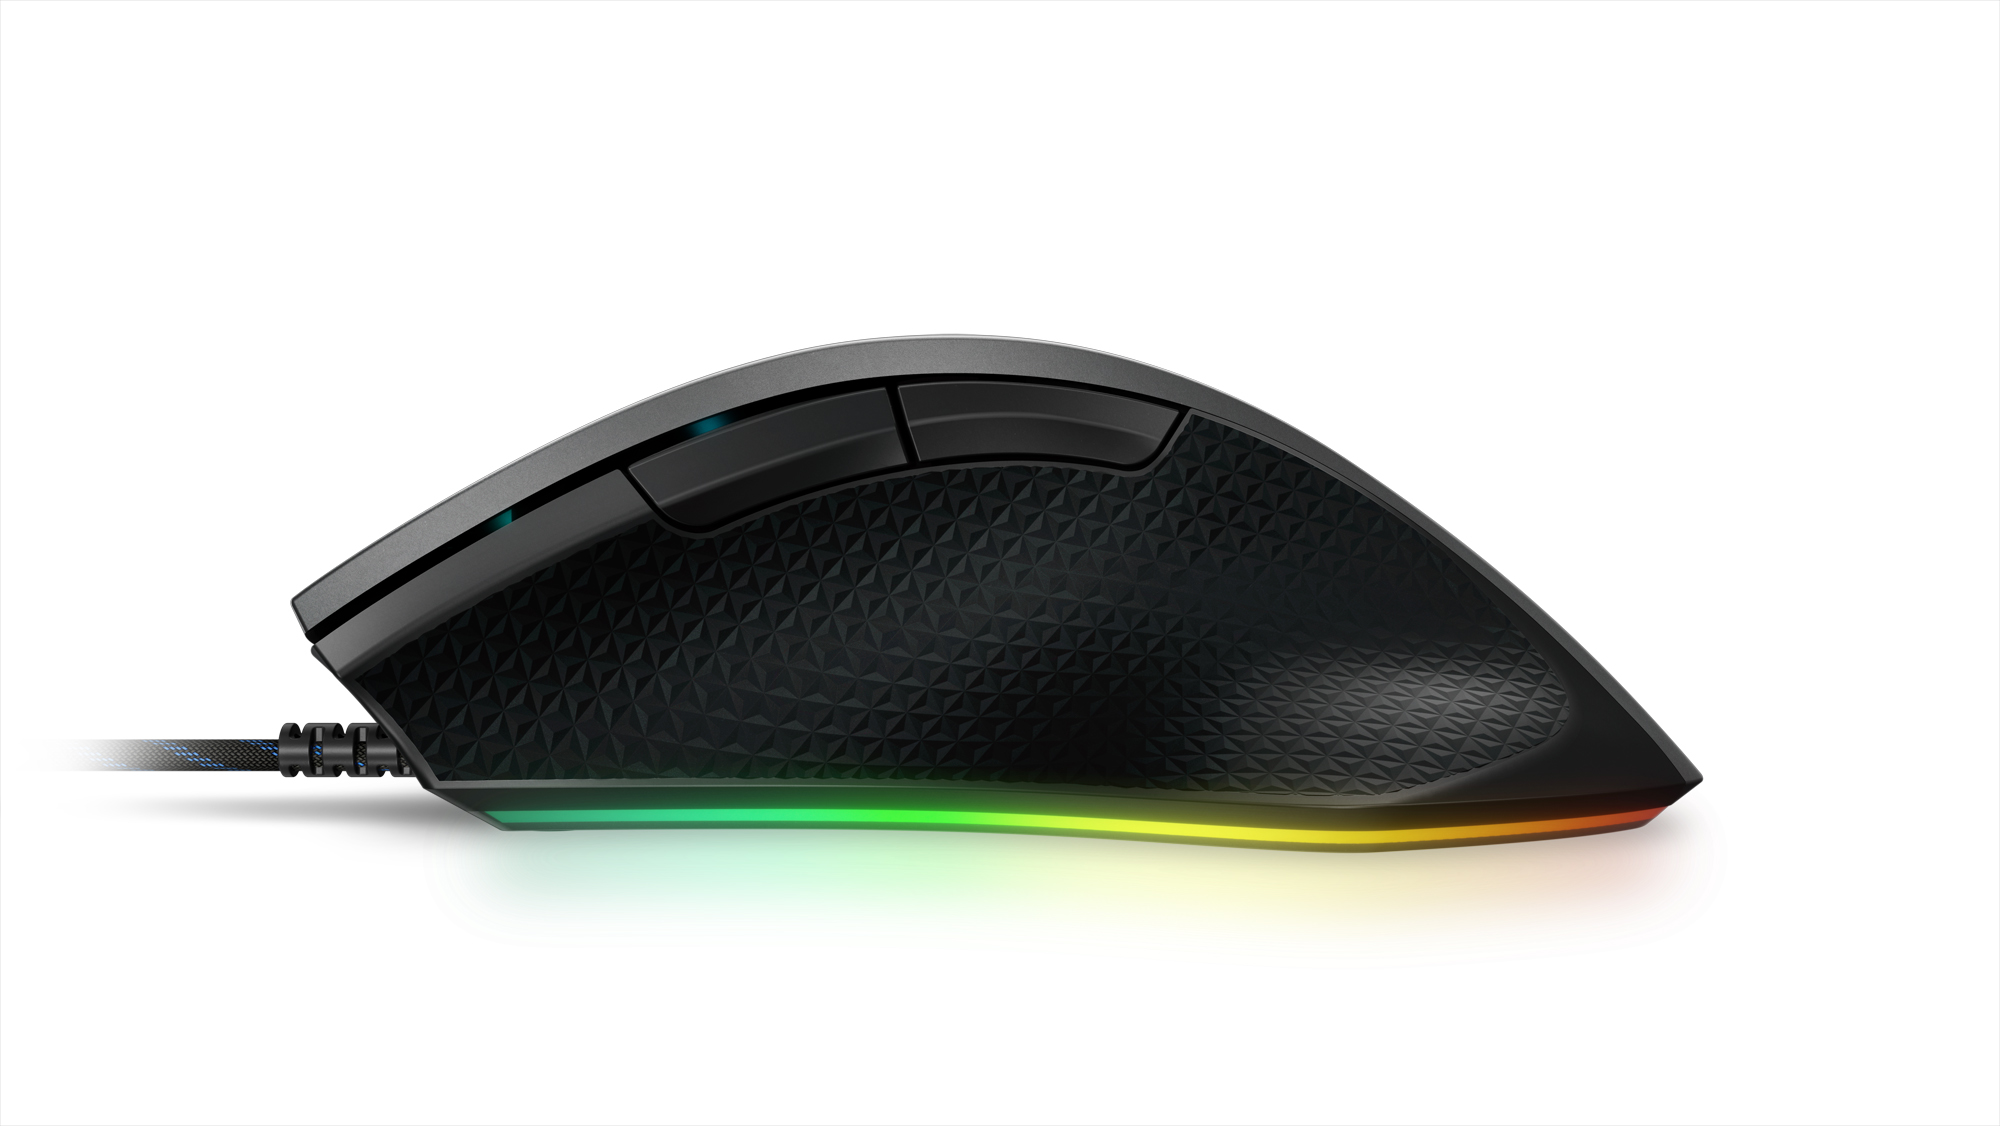 lenovo announce new legion gaming peripherals ces 2019 04 m500 7x programmable buttons